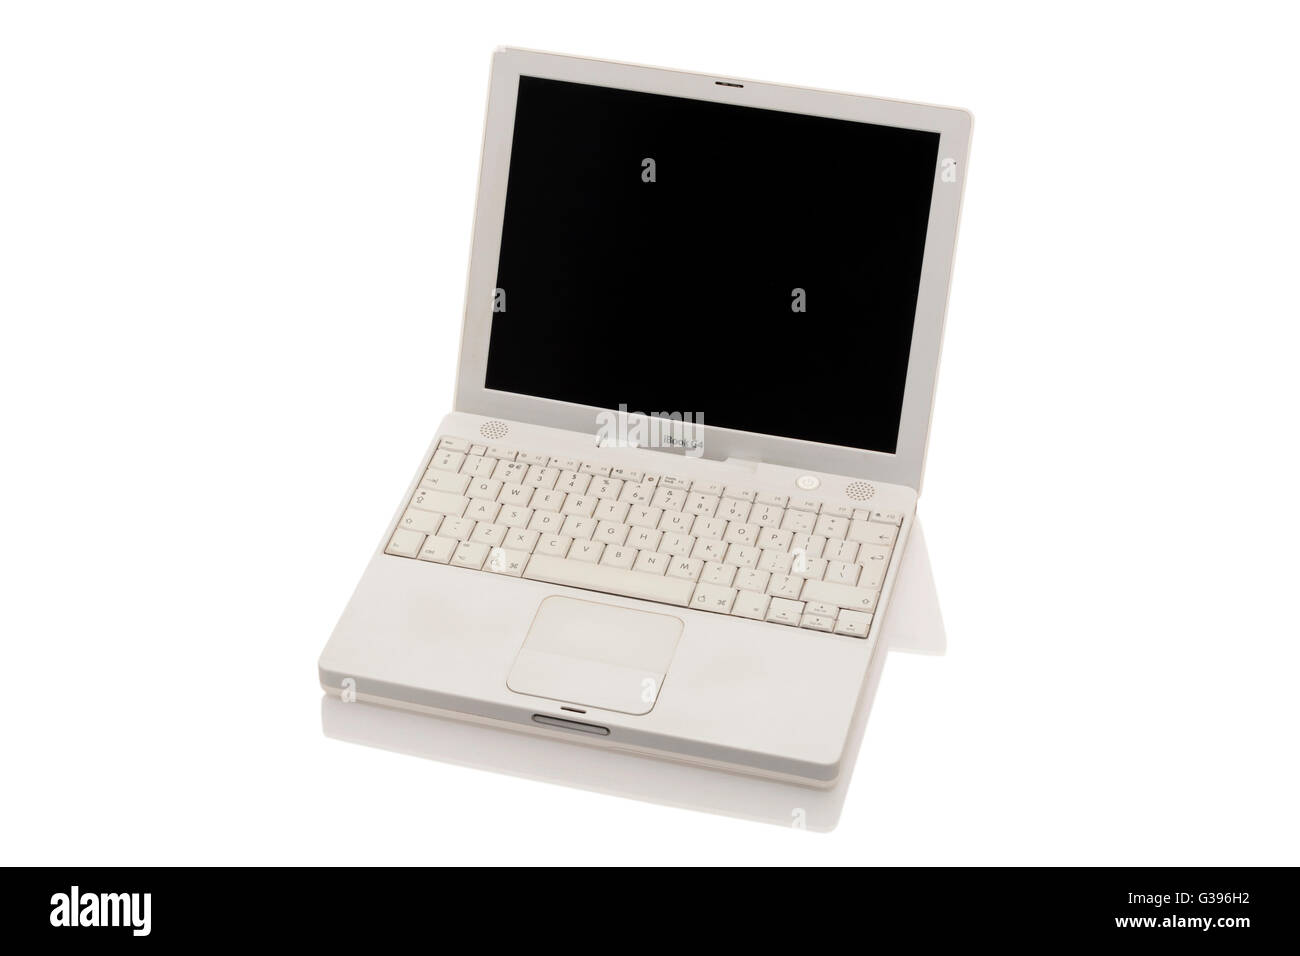 Apple iBook G4 laptop / lap top computer with scrolling TrackPad / trackpad / track pad, blank screen & keyboard. Stock Photo